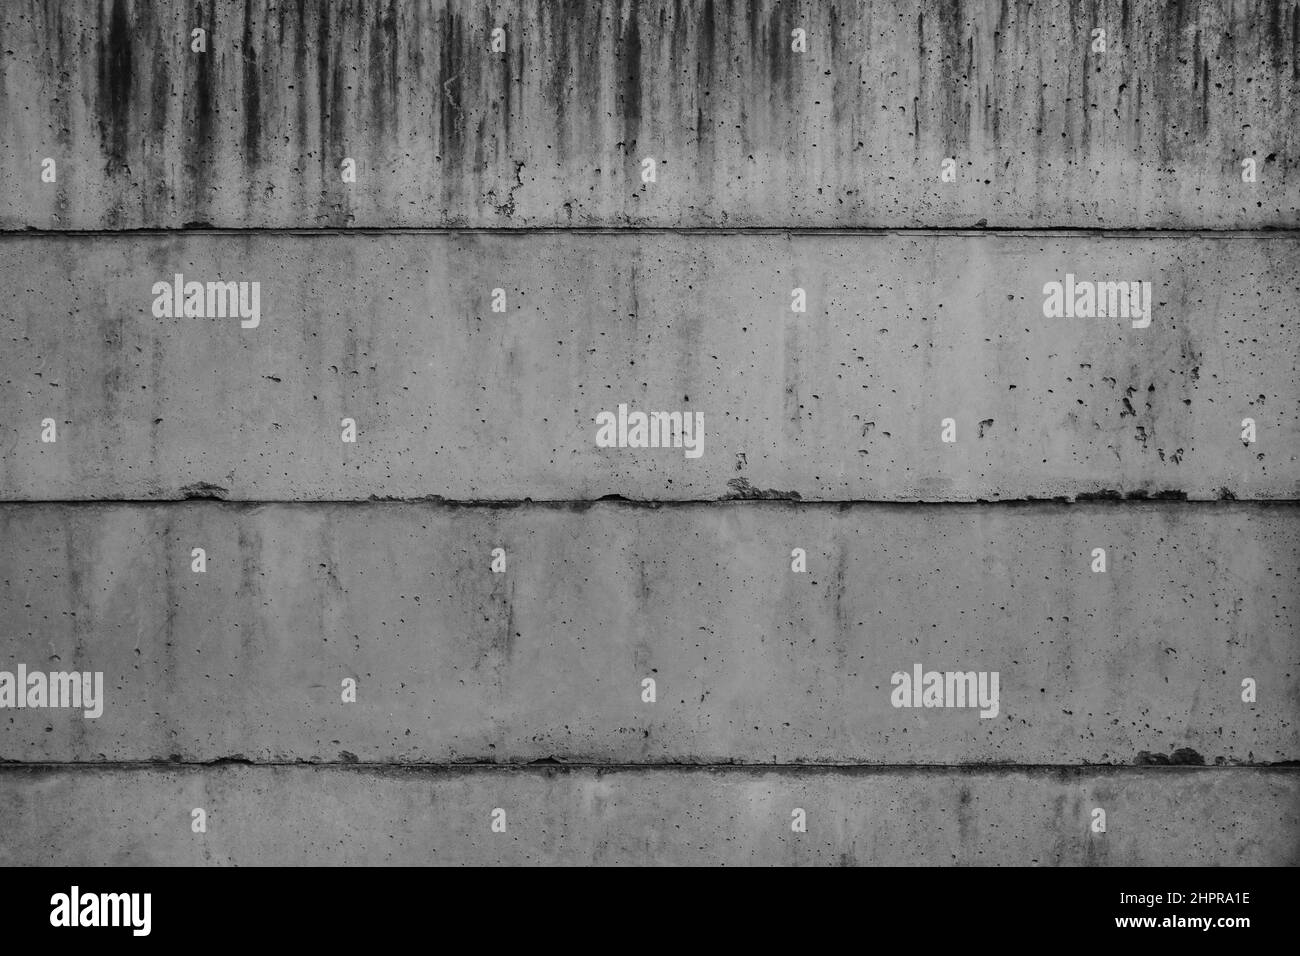 Damaged and abandoned old concrete wall texture. Stock Photo